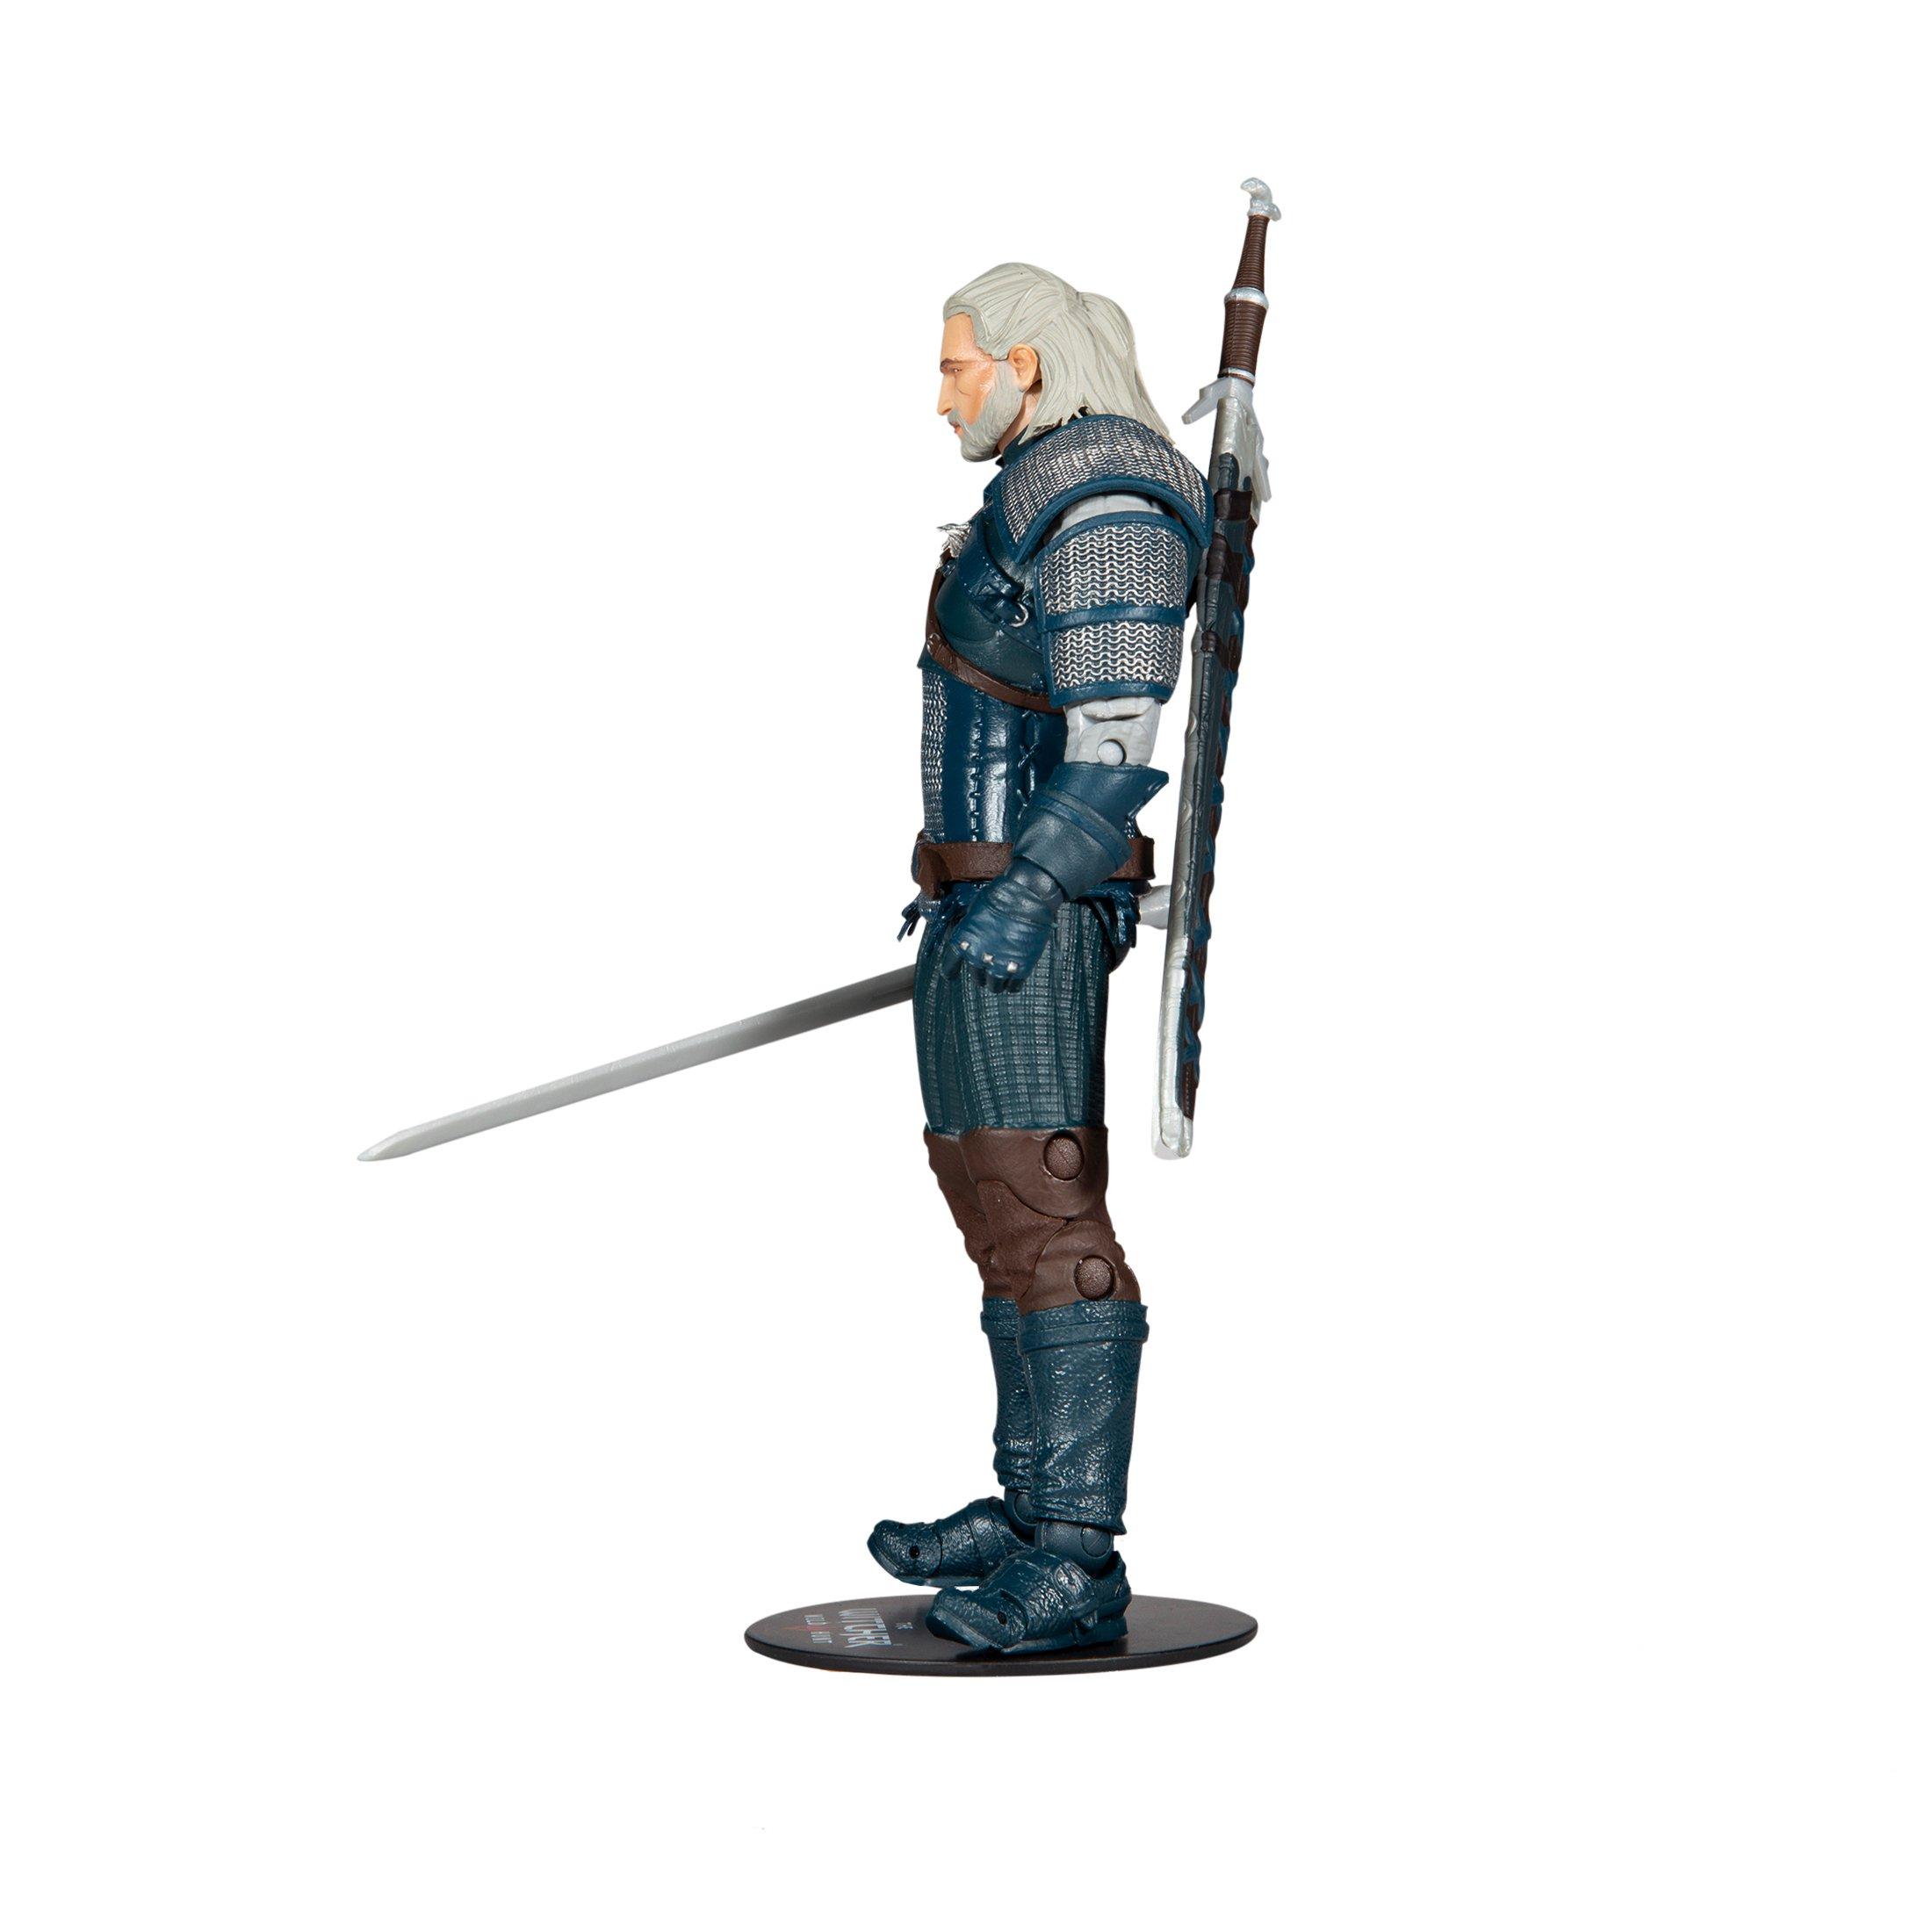 list item 2 of 10 McFarlane Toys The Witcher 3 Geralt Viper Armor Statue 7-in Action Figure